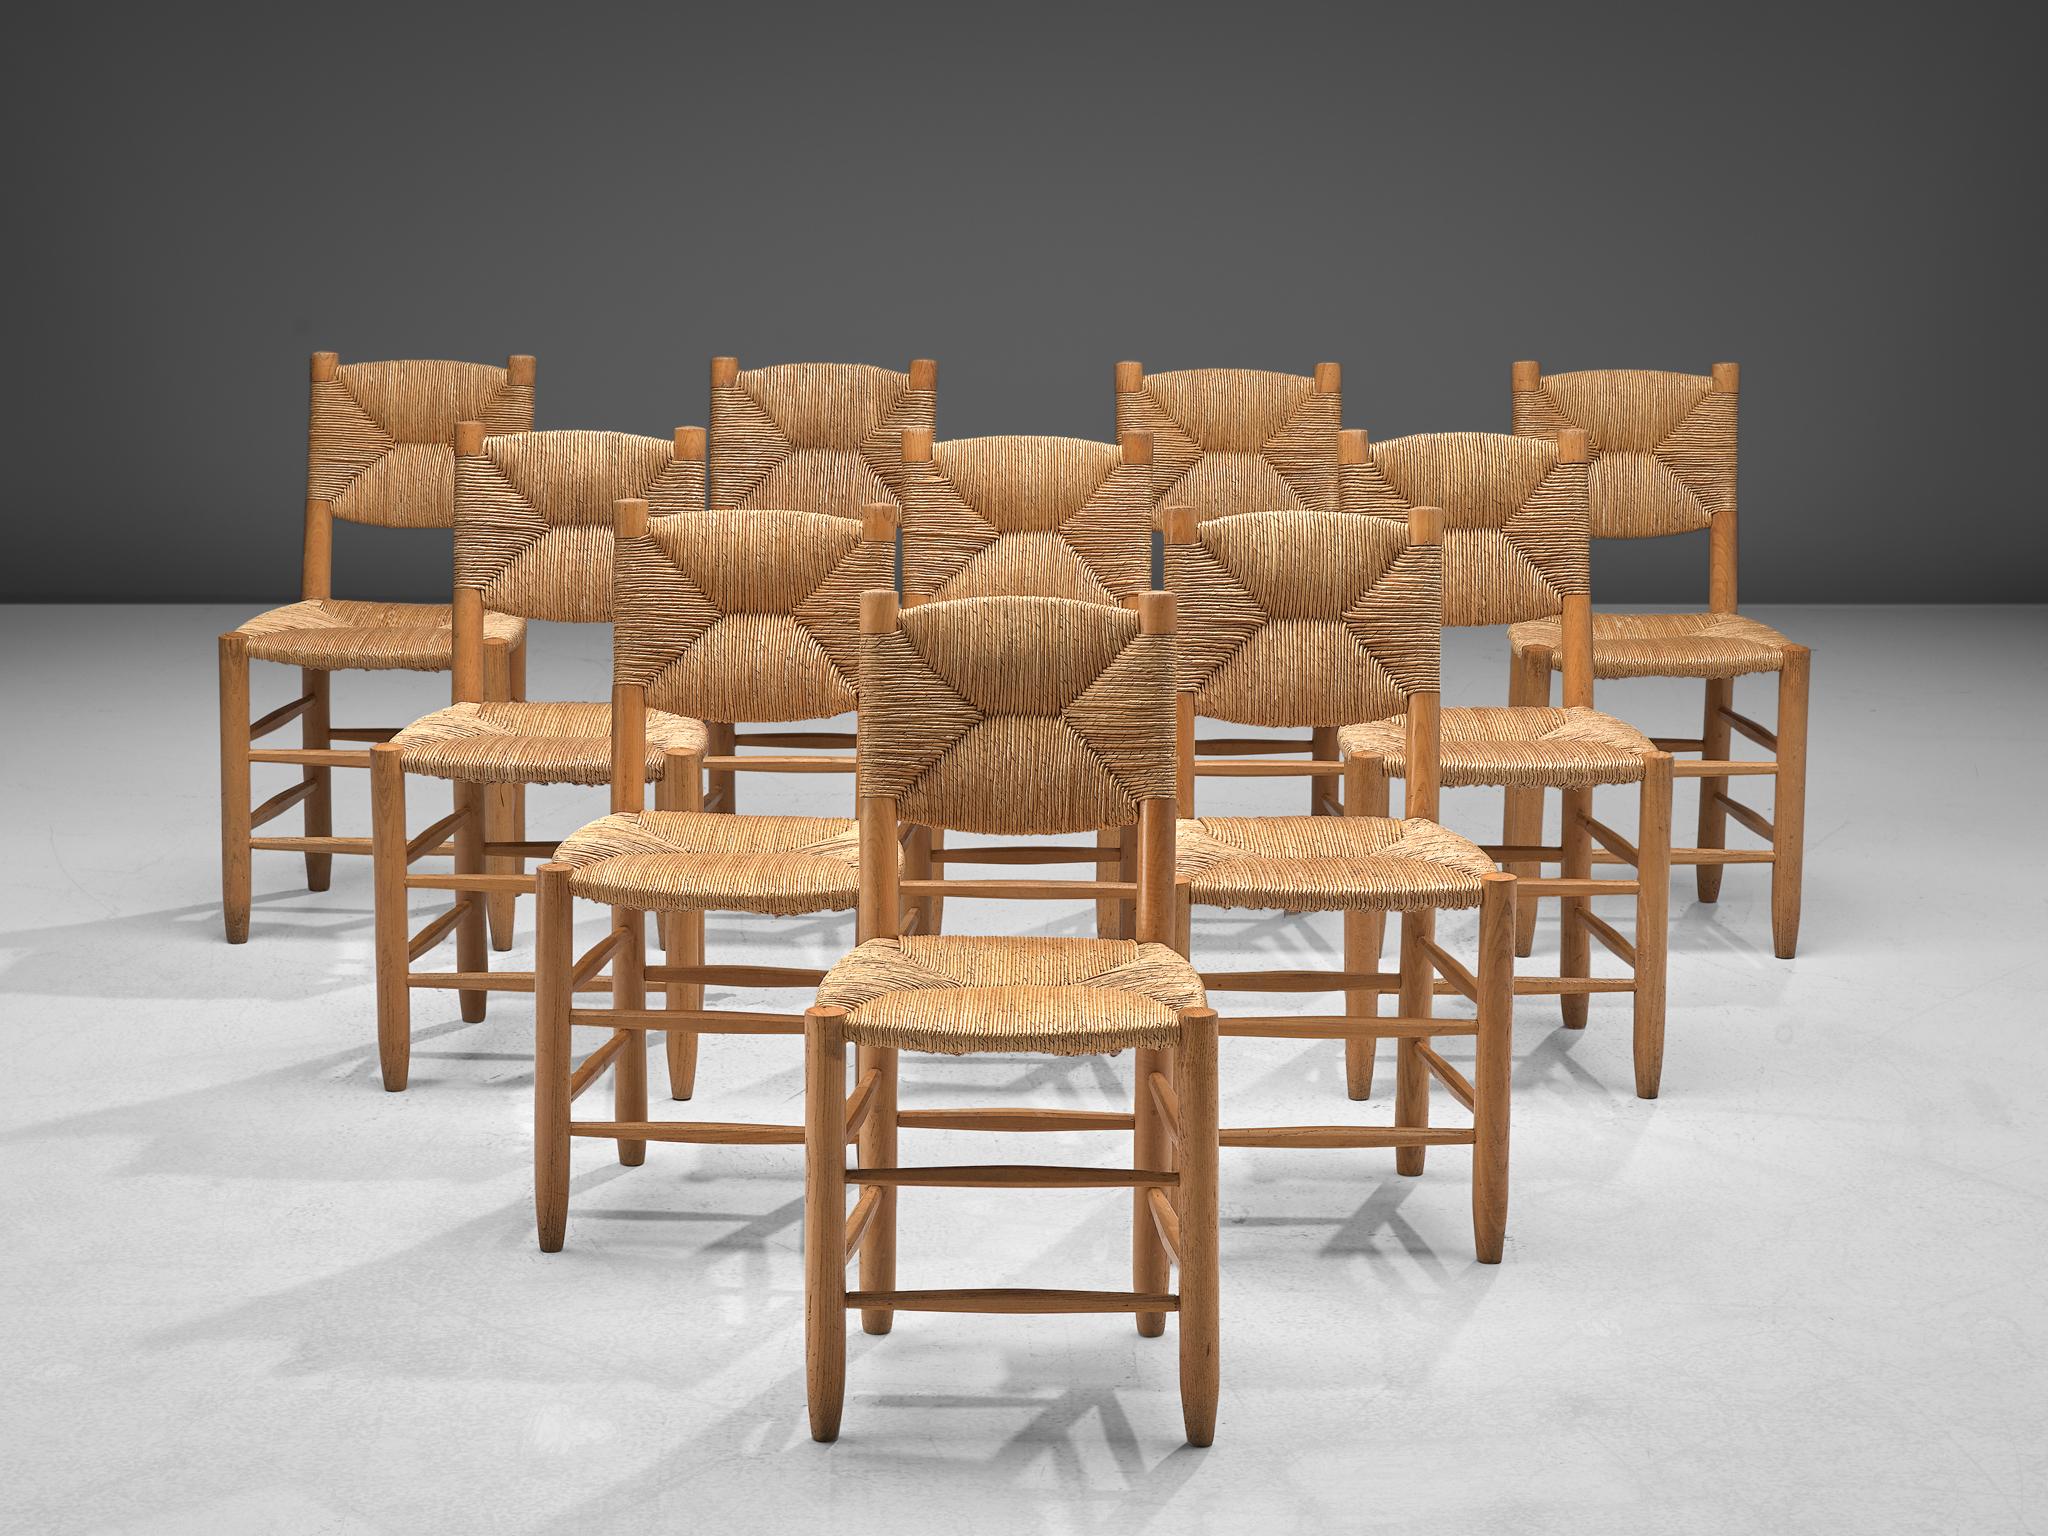 Charlotte Perriand edited by Steph Simon, set of 10 'Bauche' chairs N19, ash and cane, France, 1950s.

Rustic and naturalist set of dining chairs executed in ashwood and wicker. Charlotte Perriand created this model with an inclined back in 1939